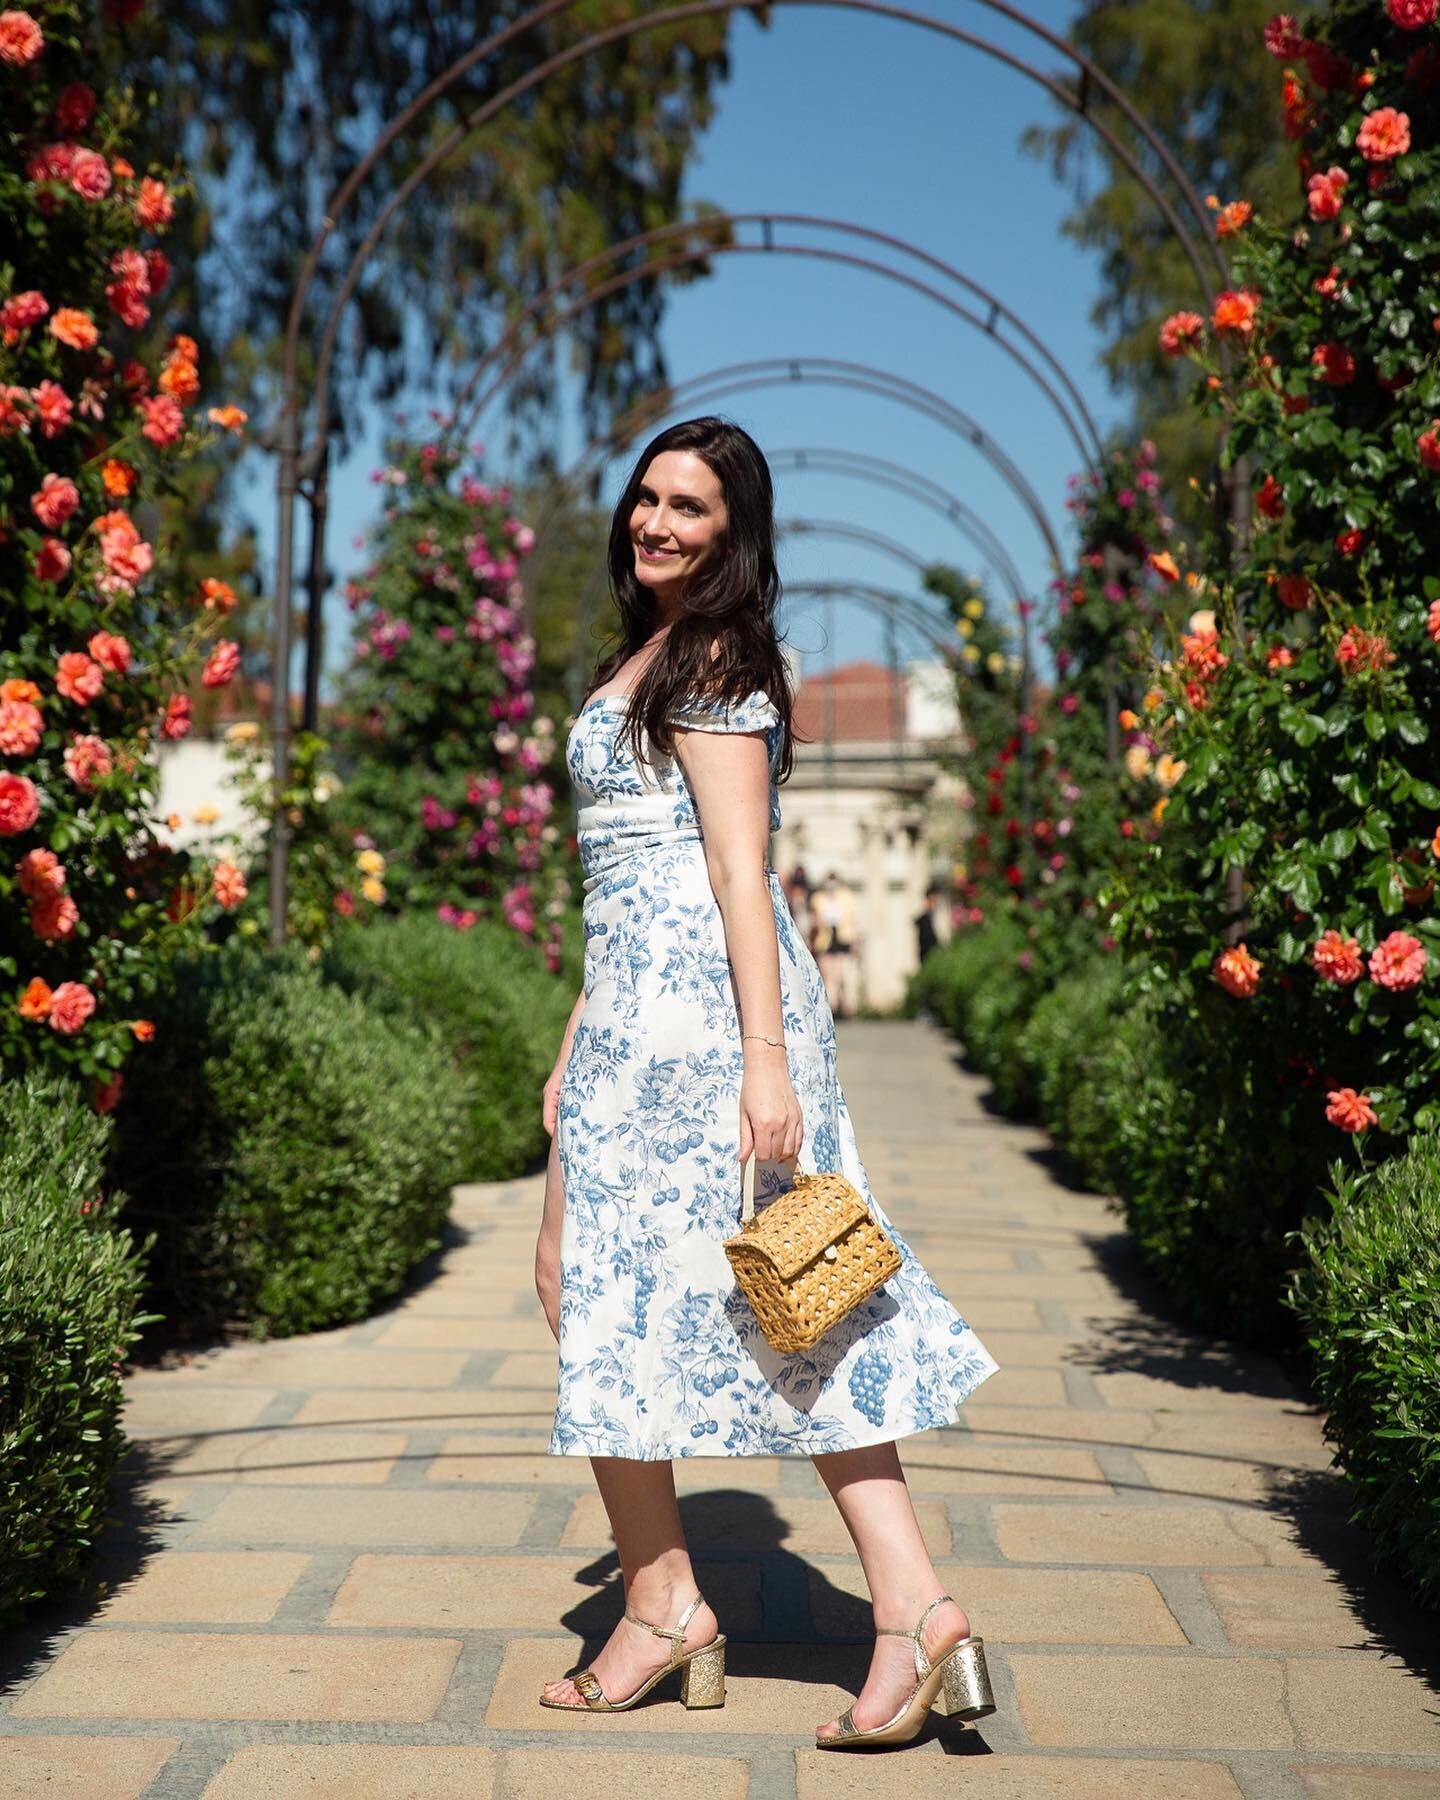 Signing off to literally smell the roses. Actual footage of me in my happy place with @ggilmorephoto There are (secret 🤫) gardens to see, sales to be shopped and marshmallows to be roasted! 💃🏻 Happy 4th! 🎆❤️

#refdress #reformation #refbabe #refr